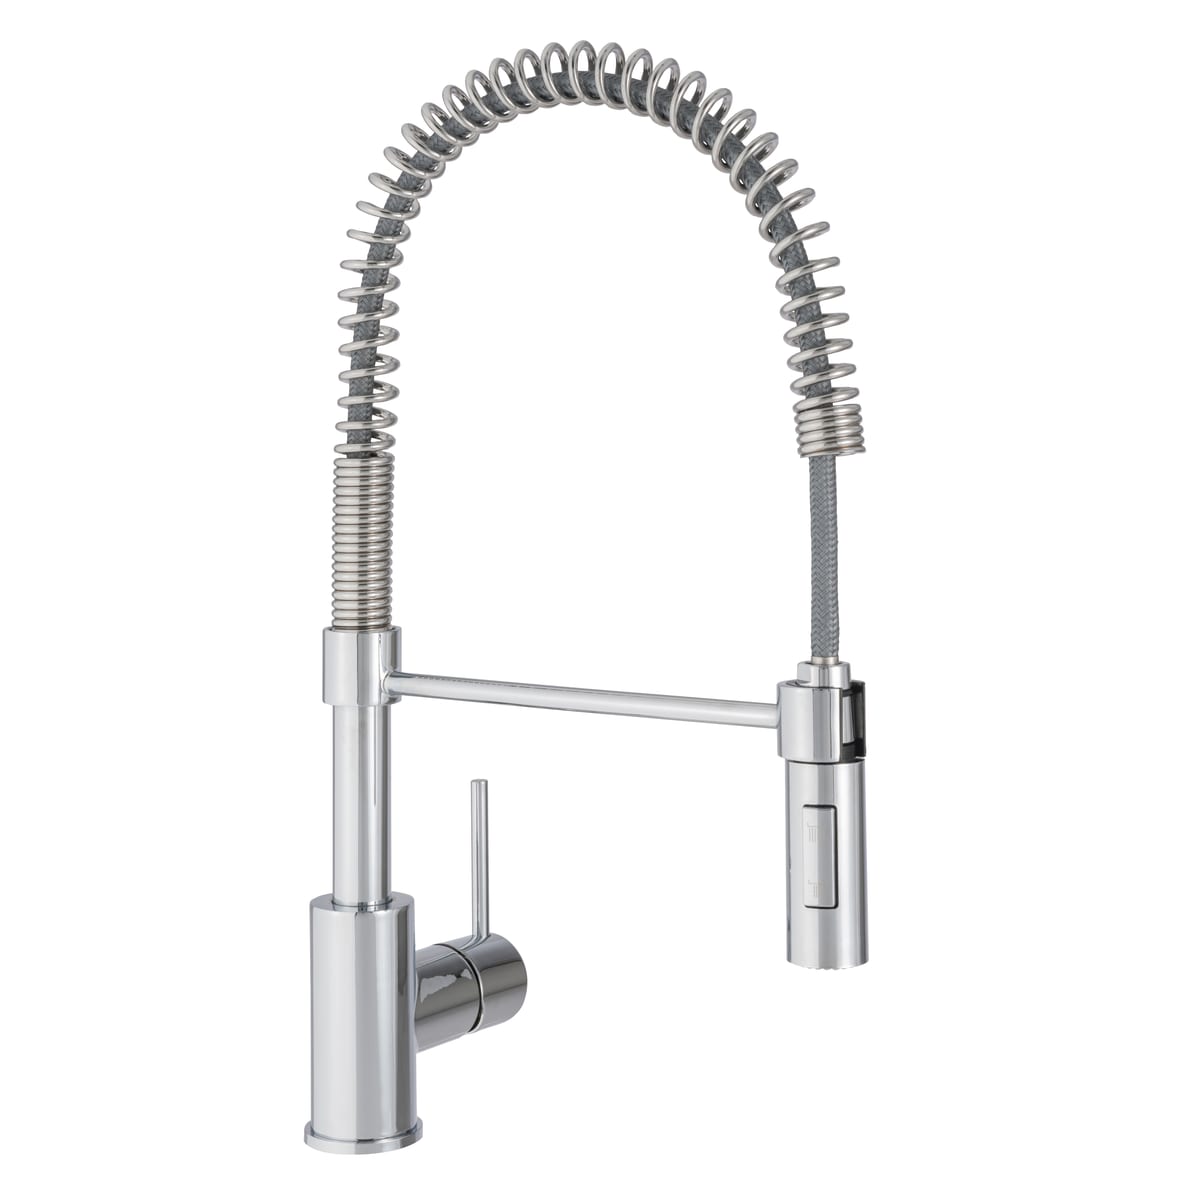 SWEET/THOMAS SPRING-LOADED SINK MIXER WITH CHROME HAND SHOWER